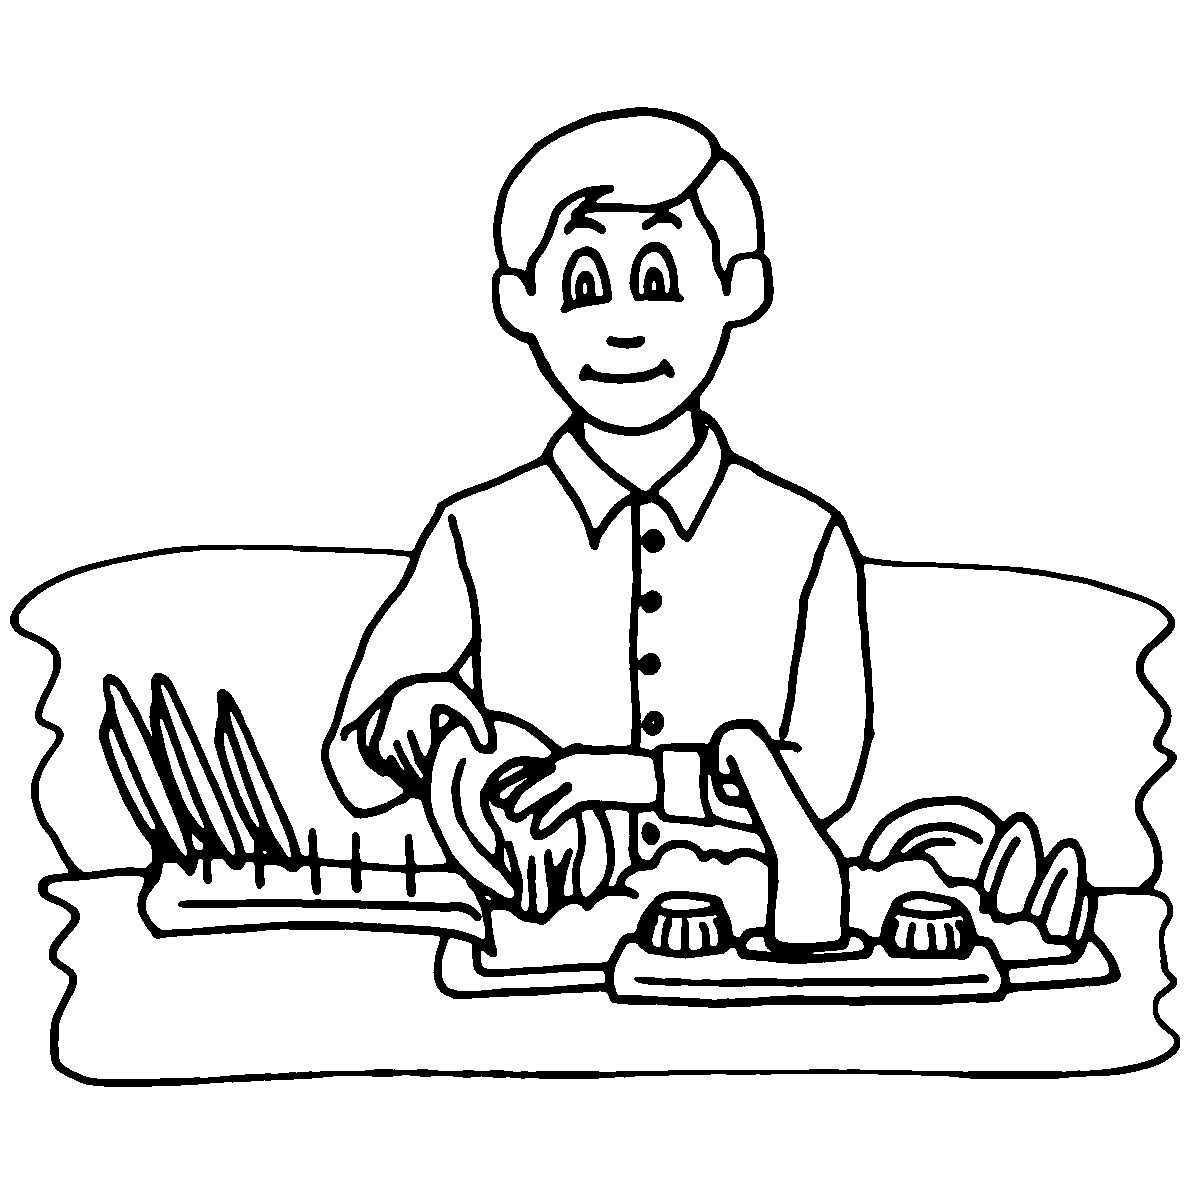 Clip Art Doing Dishes   Clipart Best